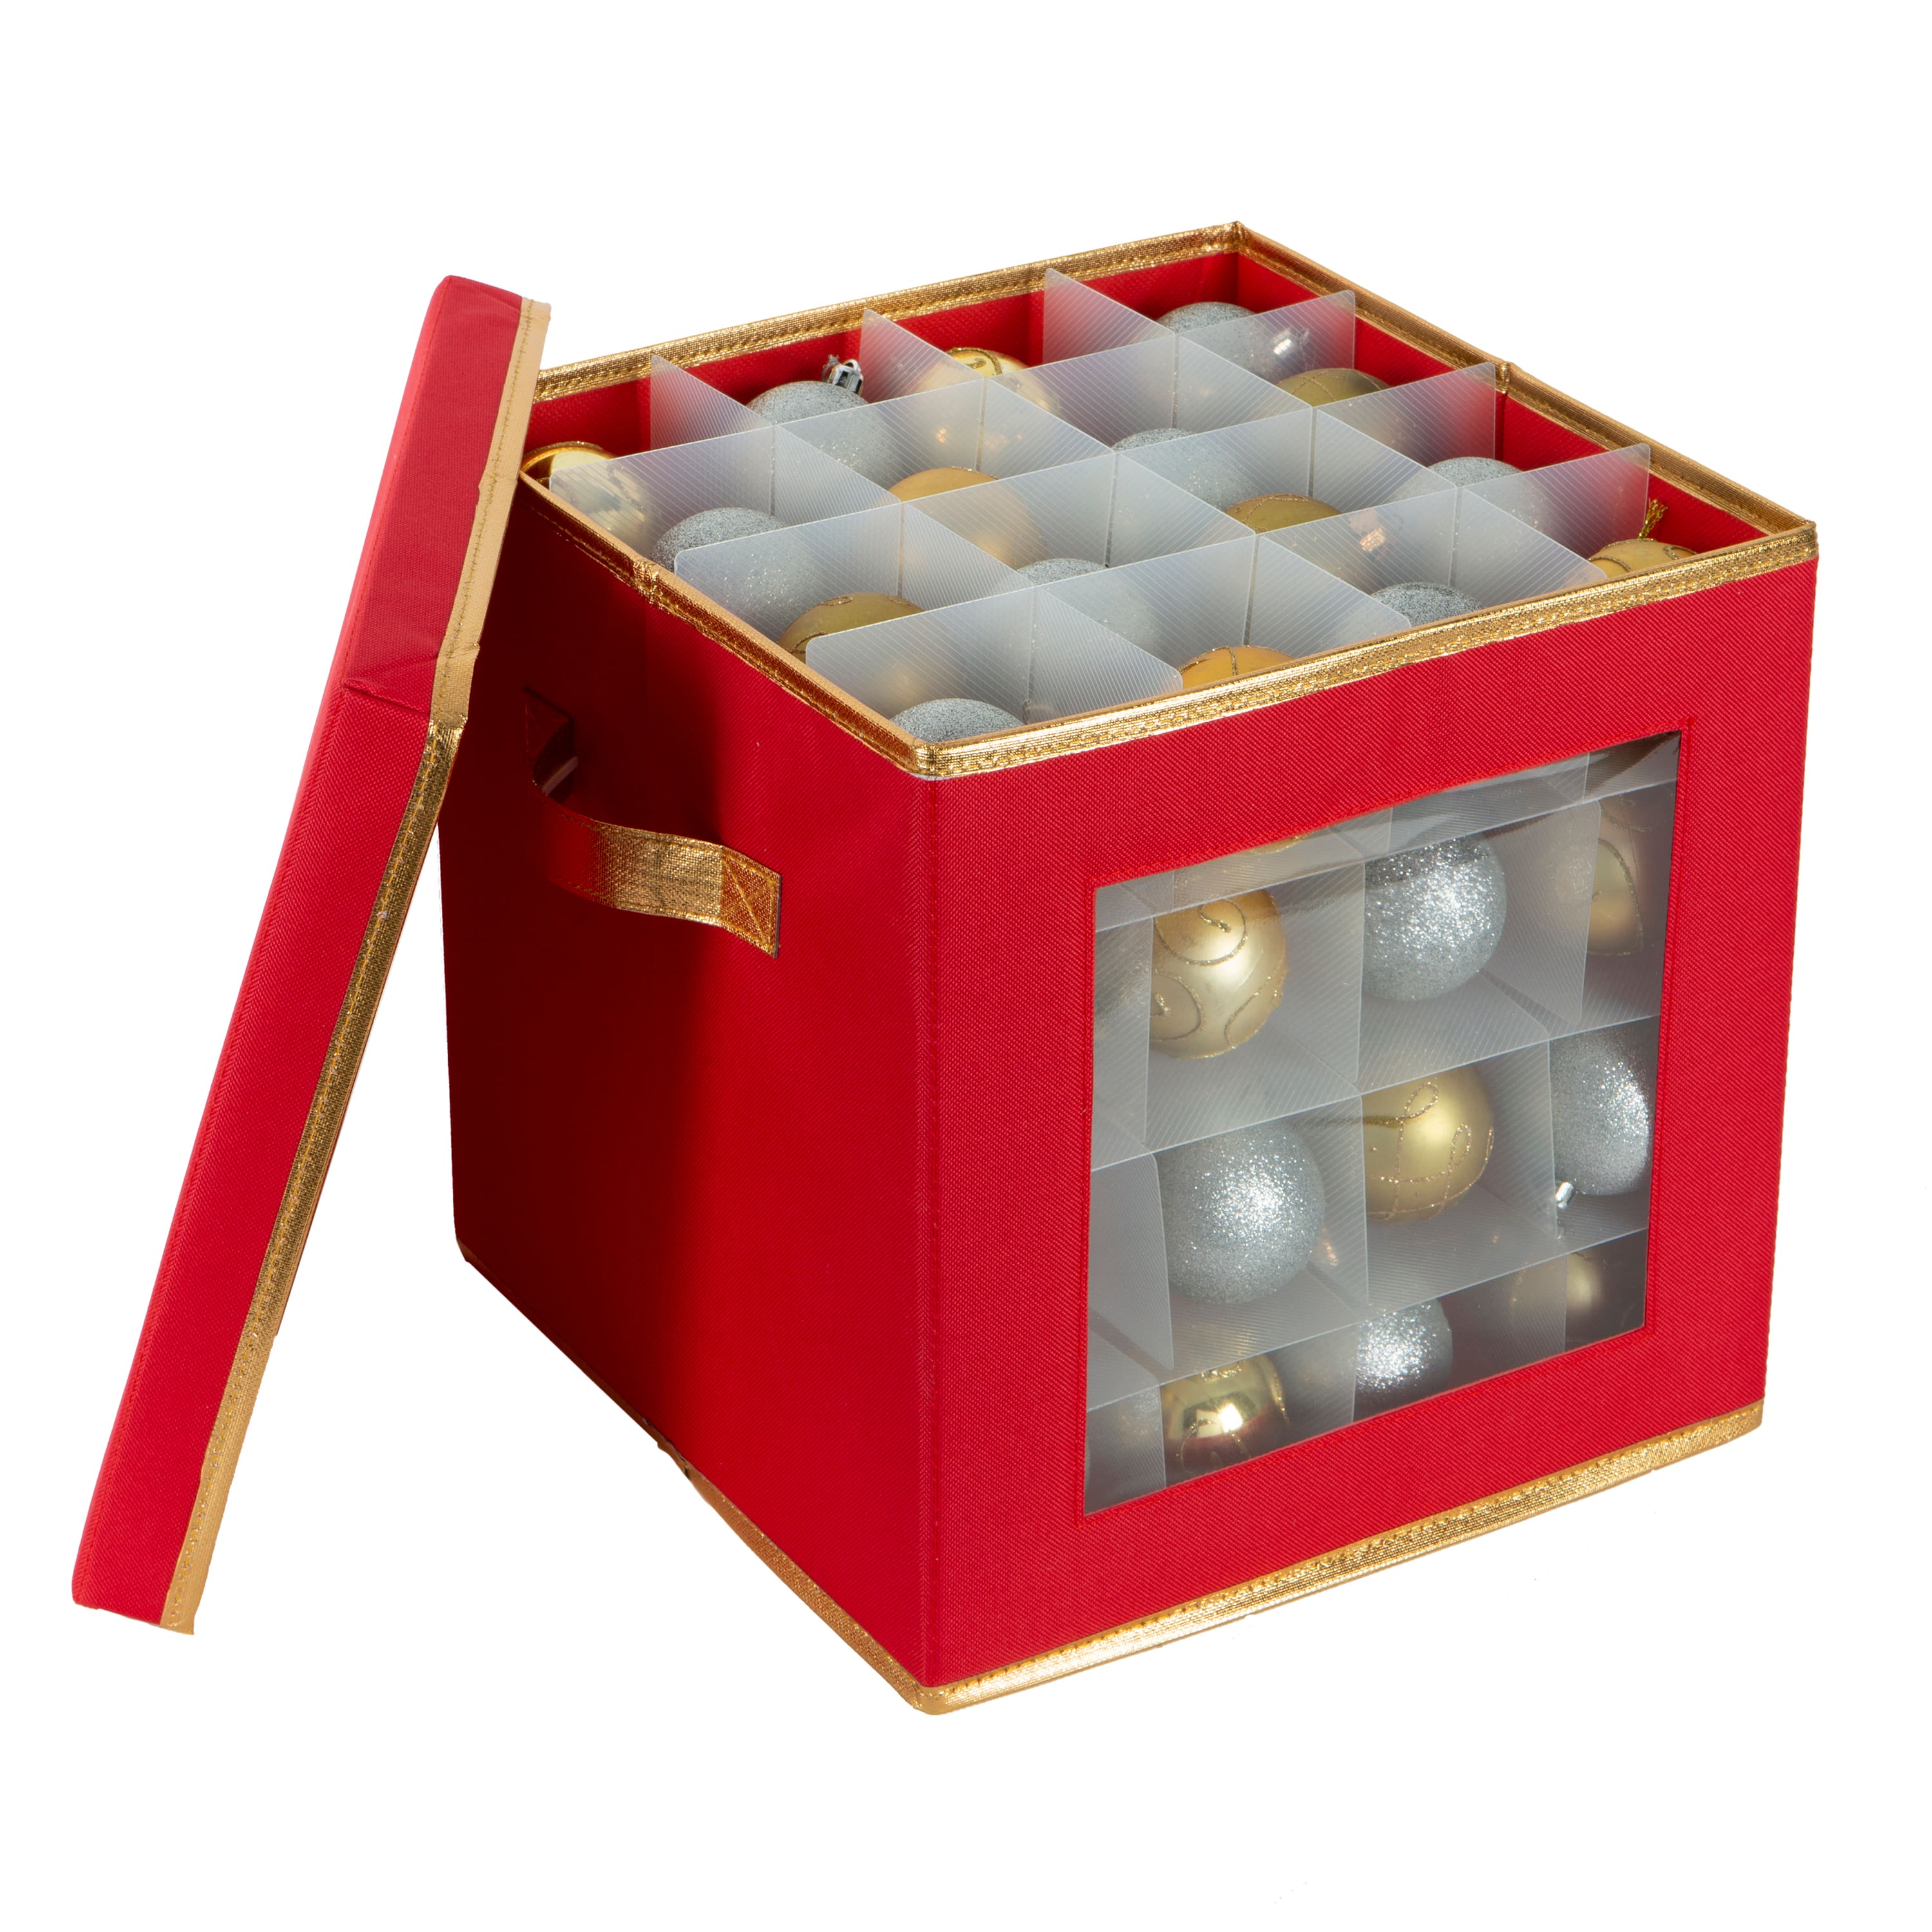 Simplify Small Ornament Storage Box with See-Through Window